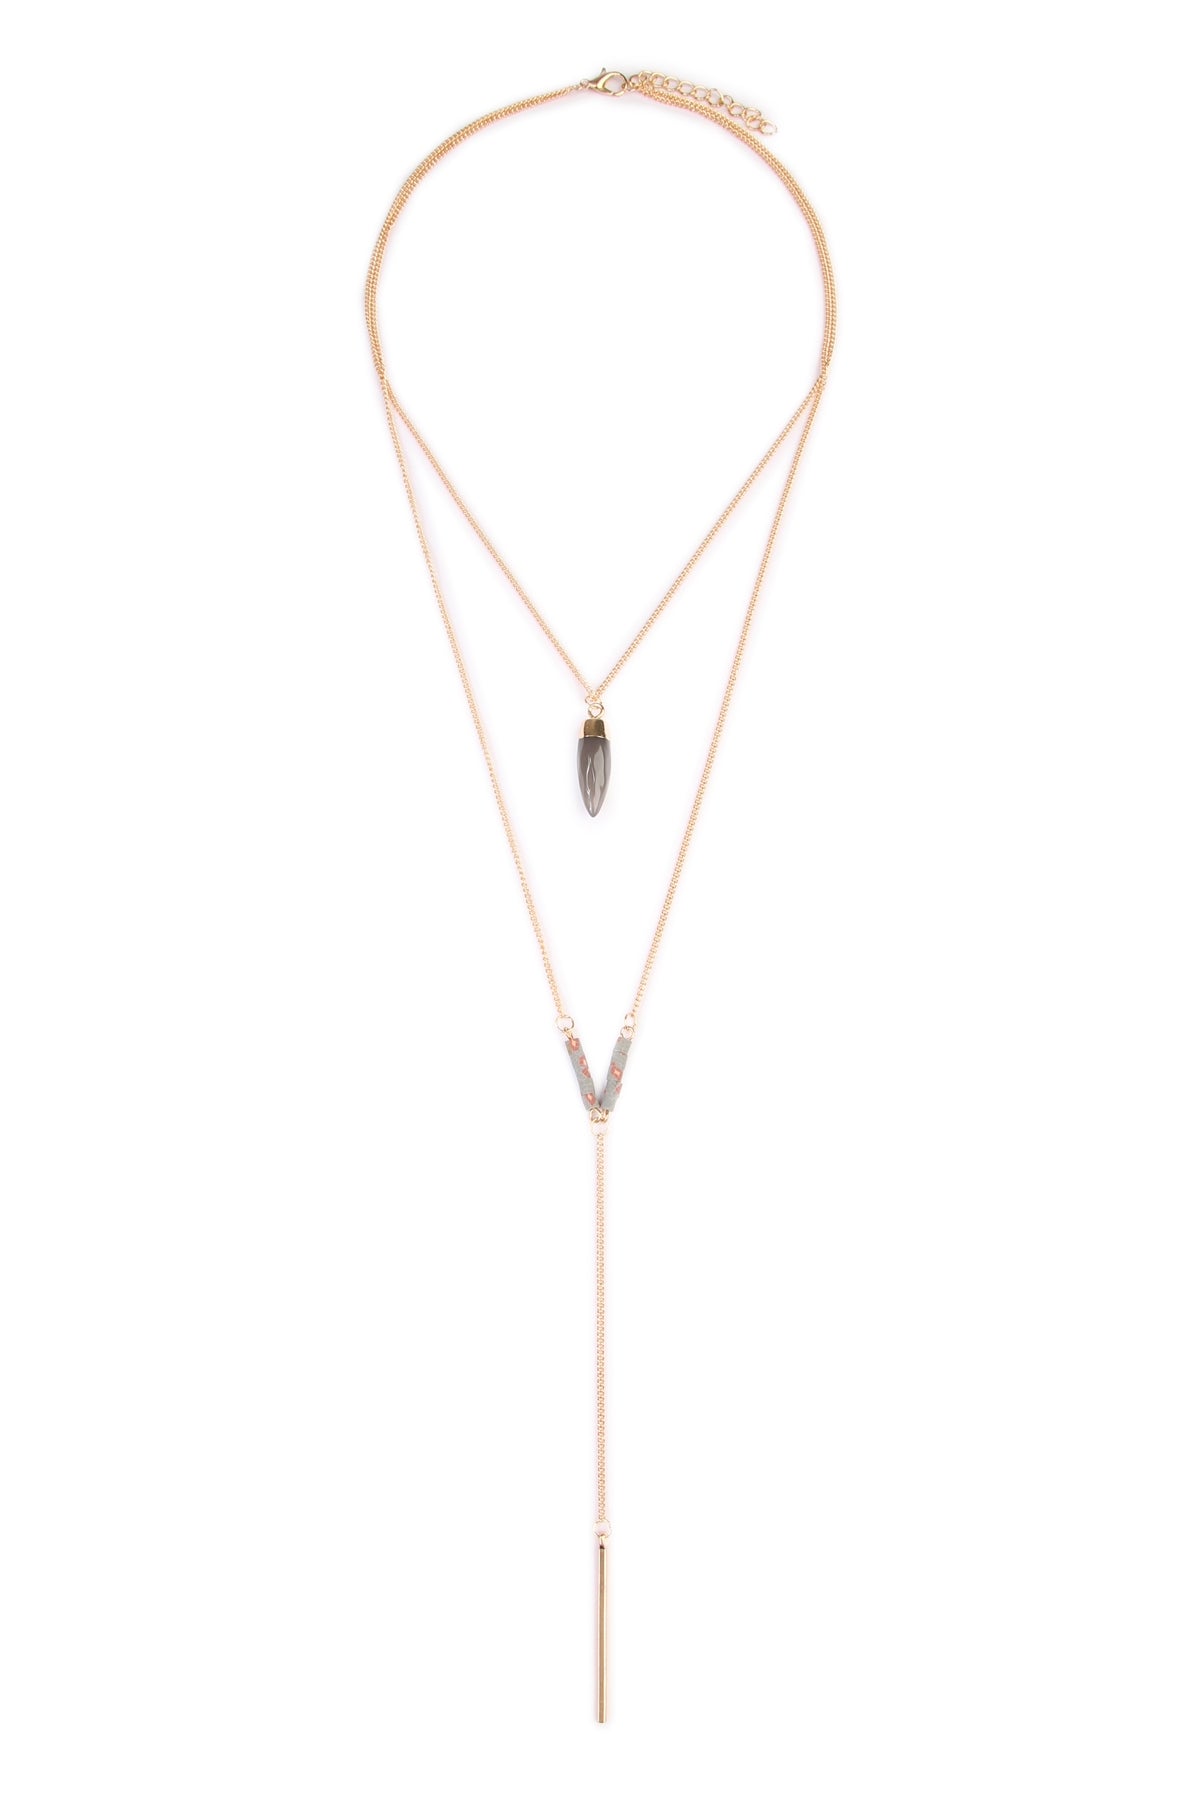 GOLD LAYERED LARIAT NECKLACE